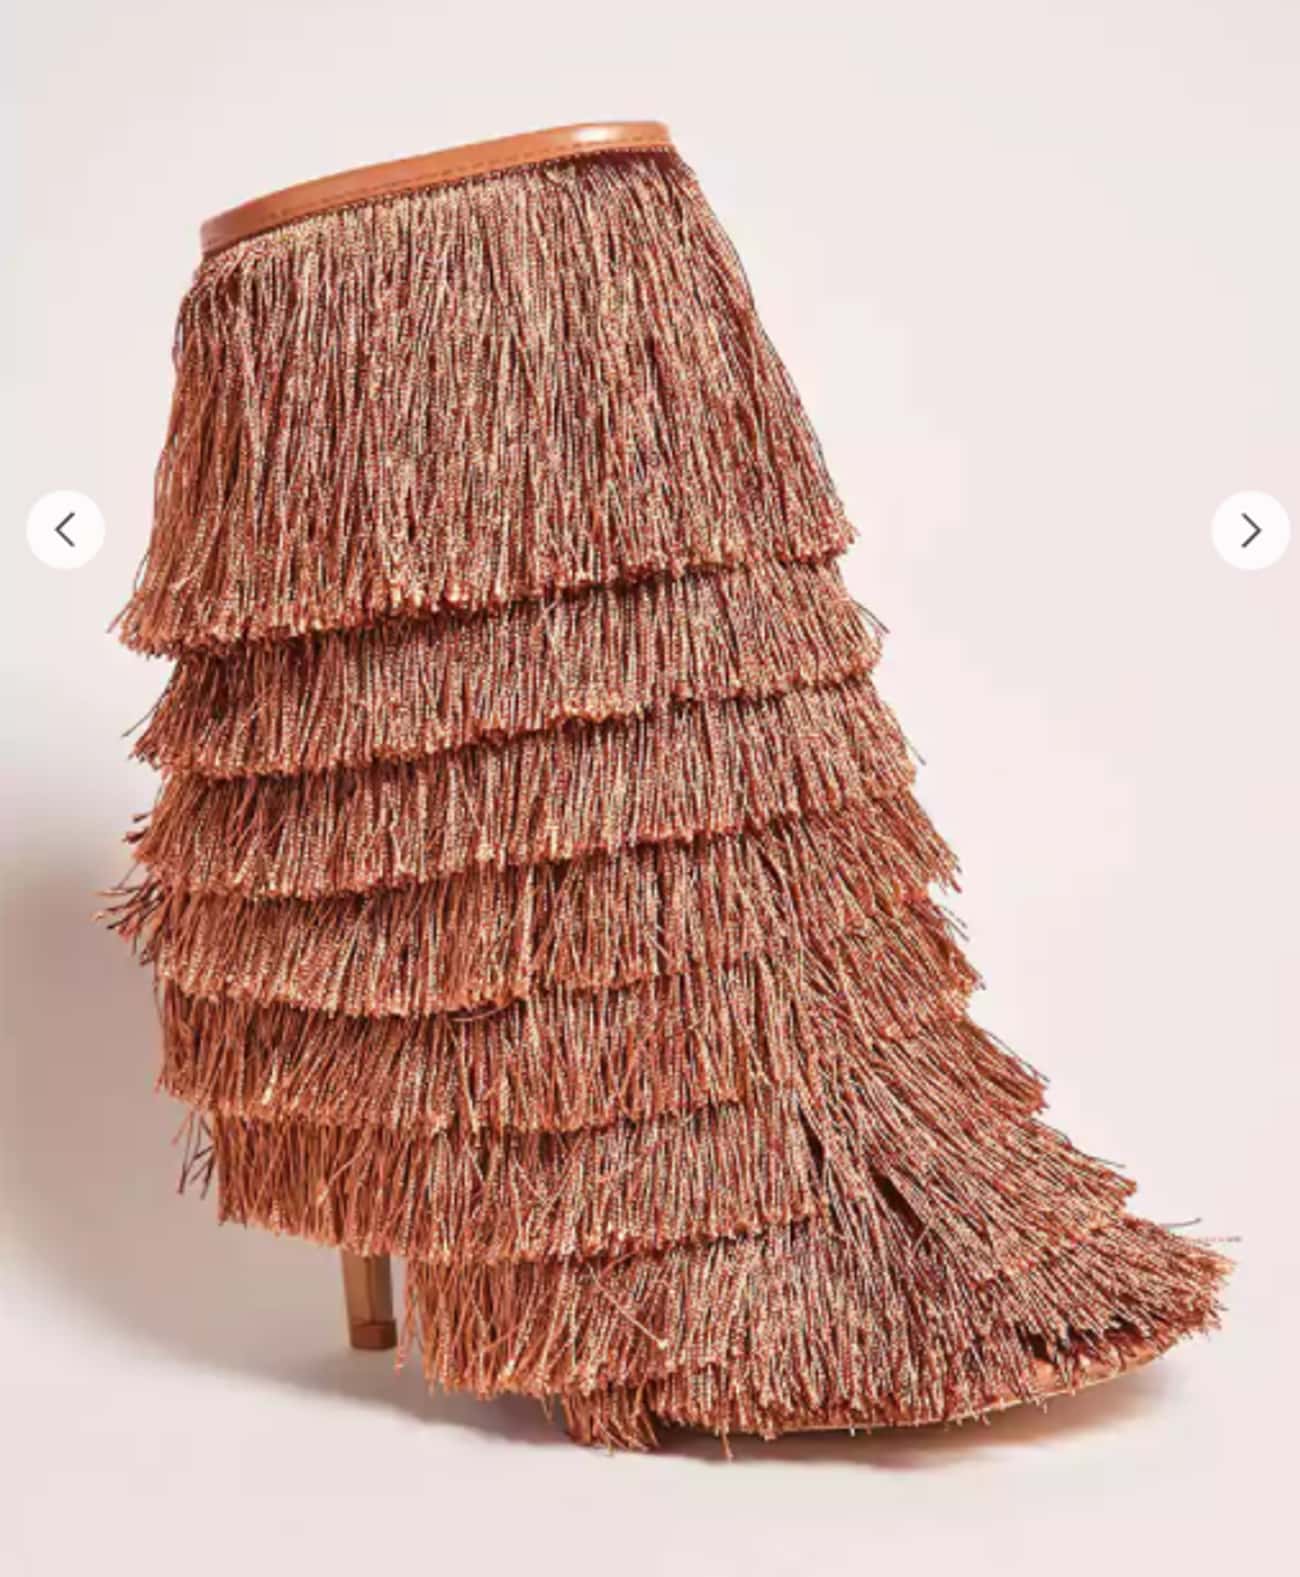 Booties For When You Feel Like Channeling Chewbacca